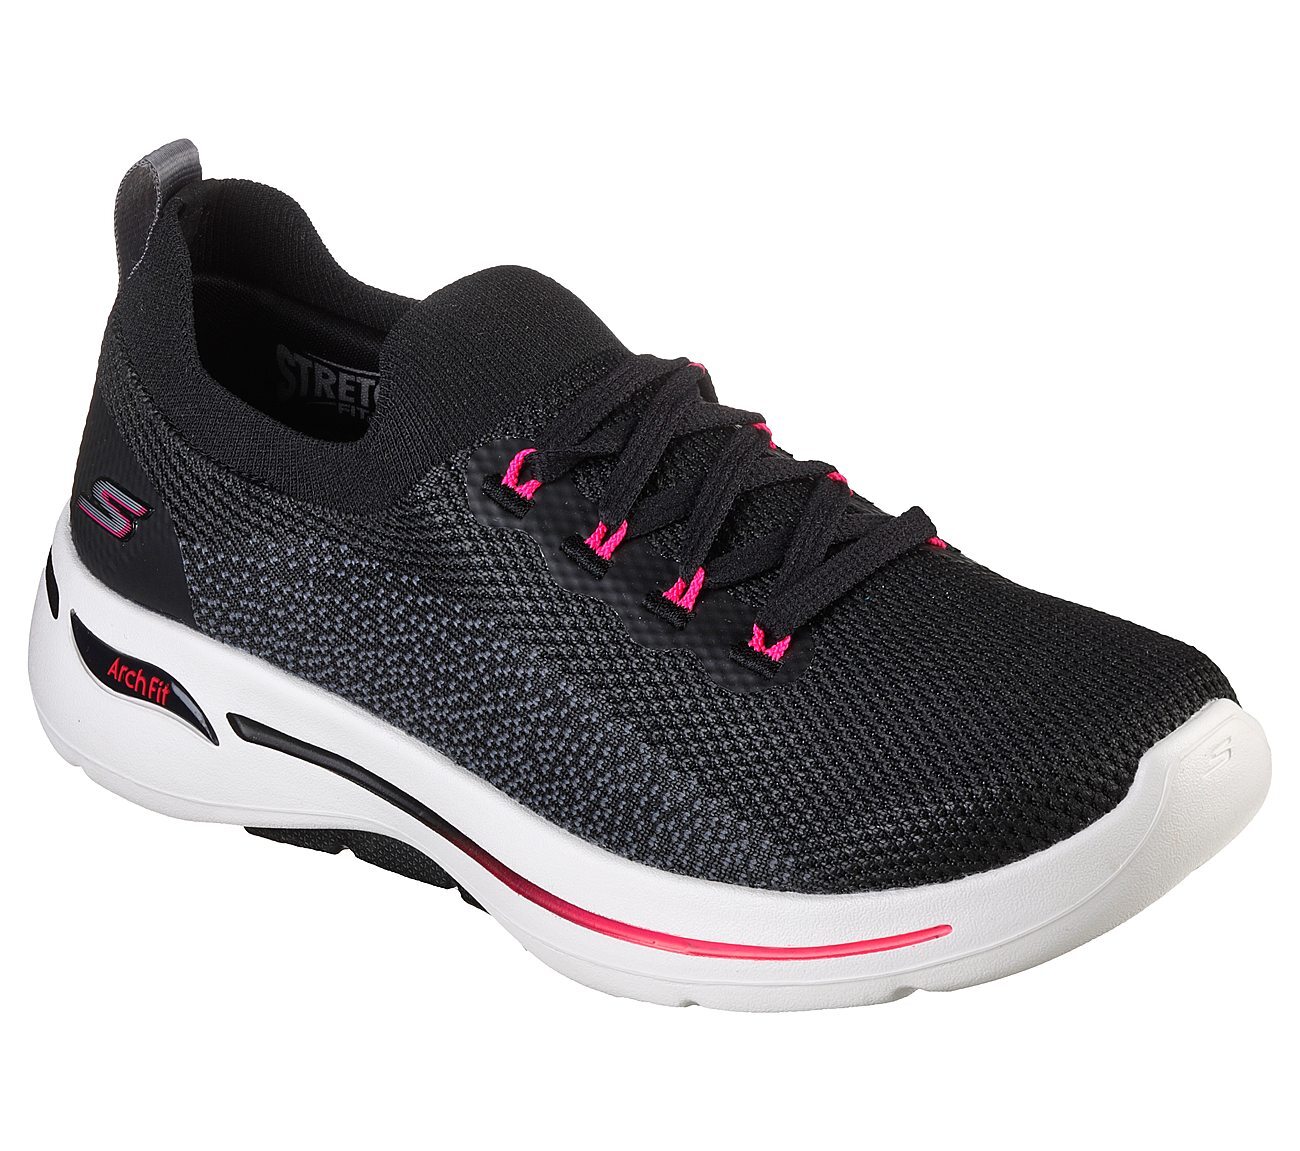 GO WALK ARCH FIT - CLANCY, BLACK/HOT PINK Footwear Right View